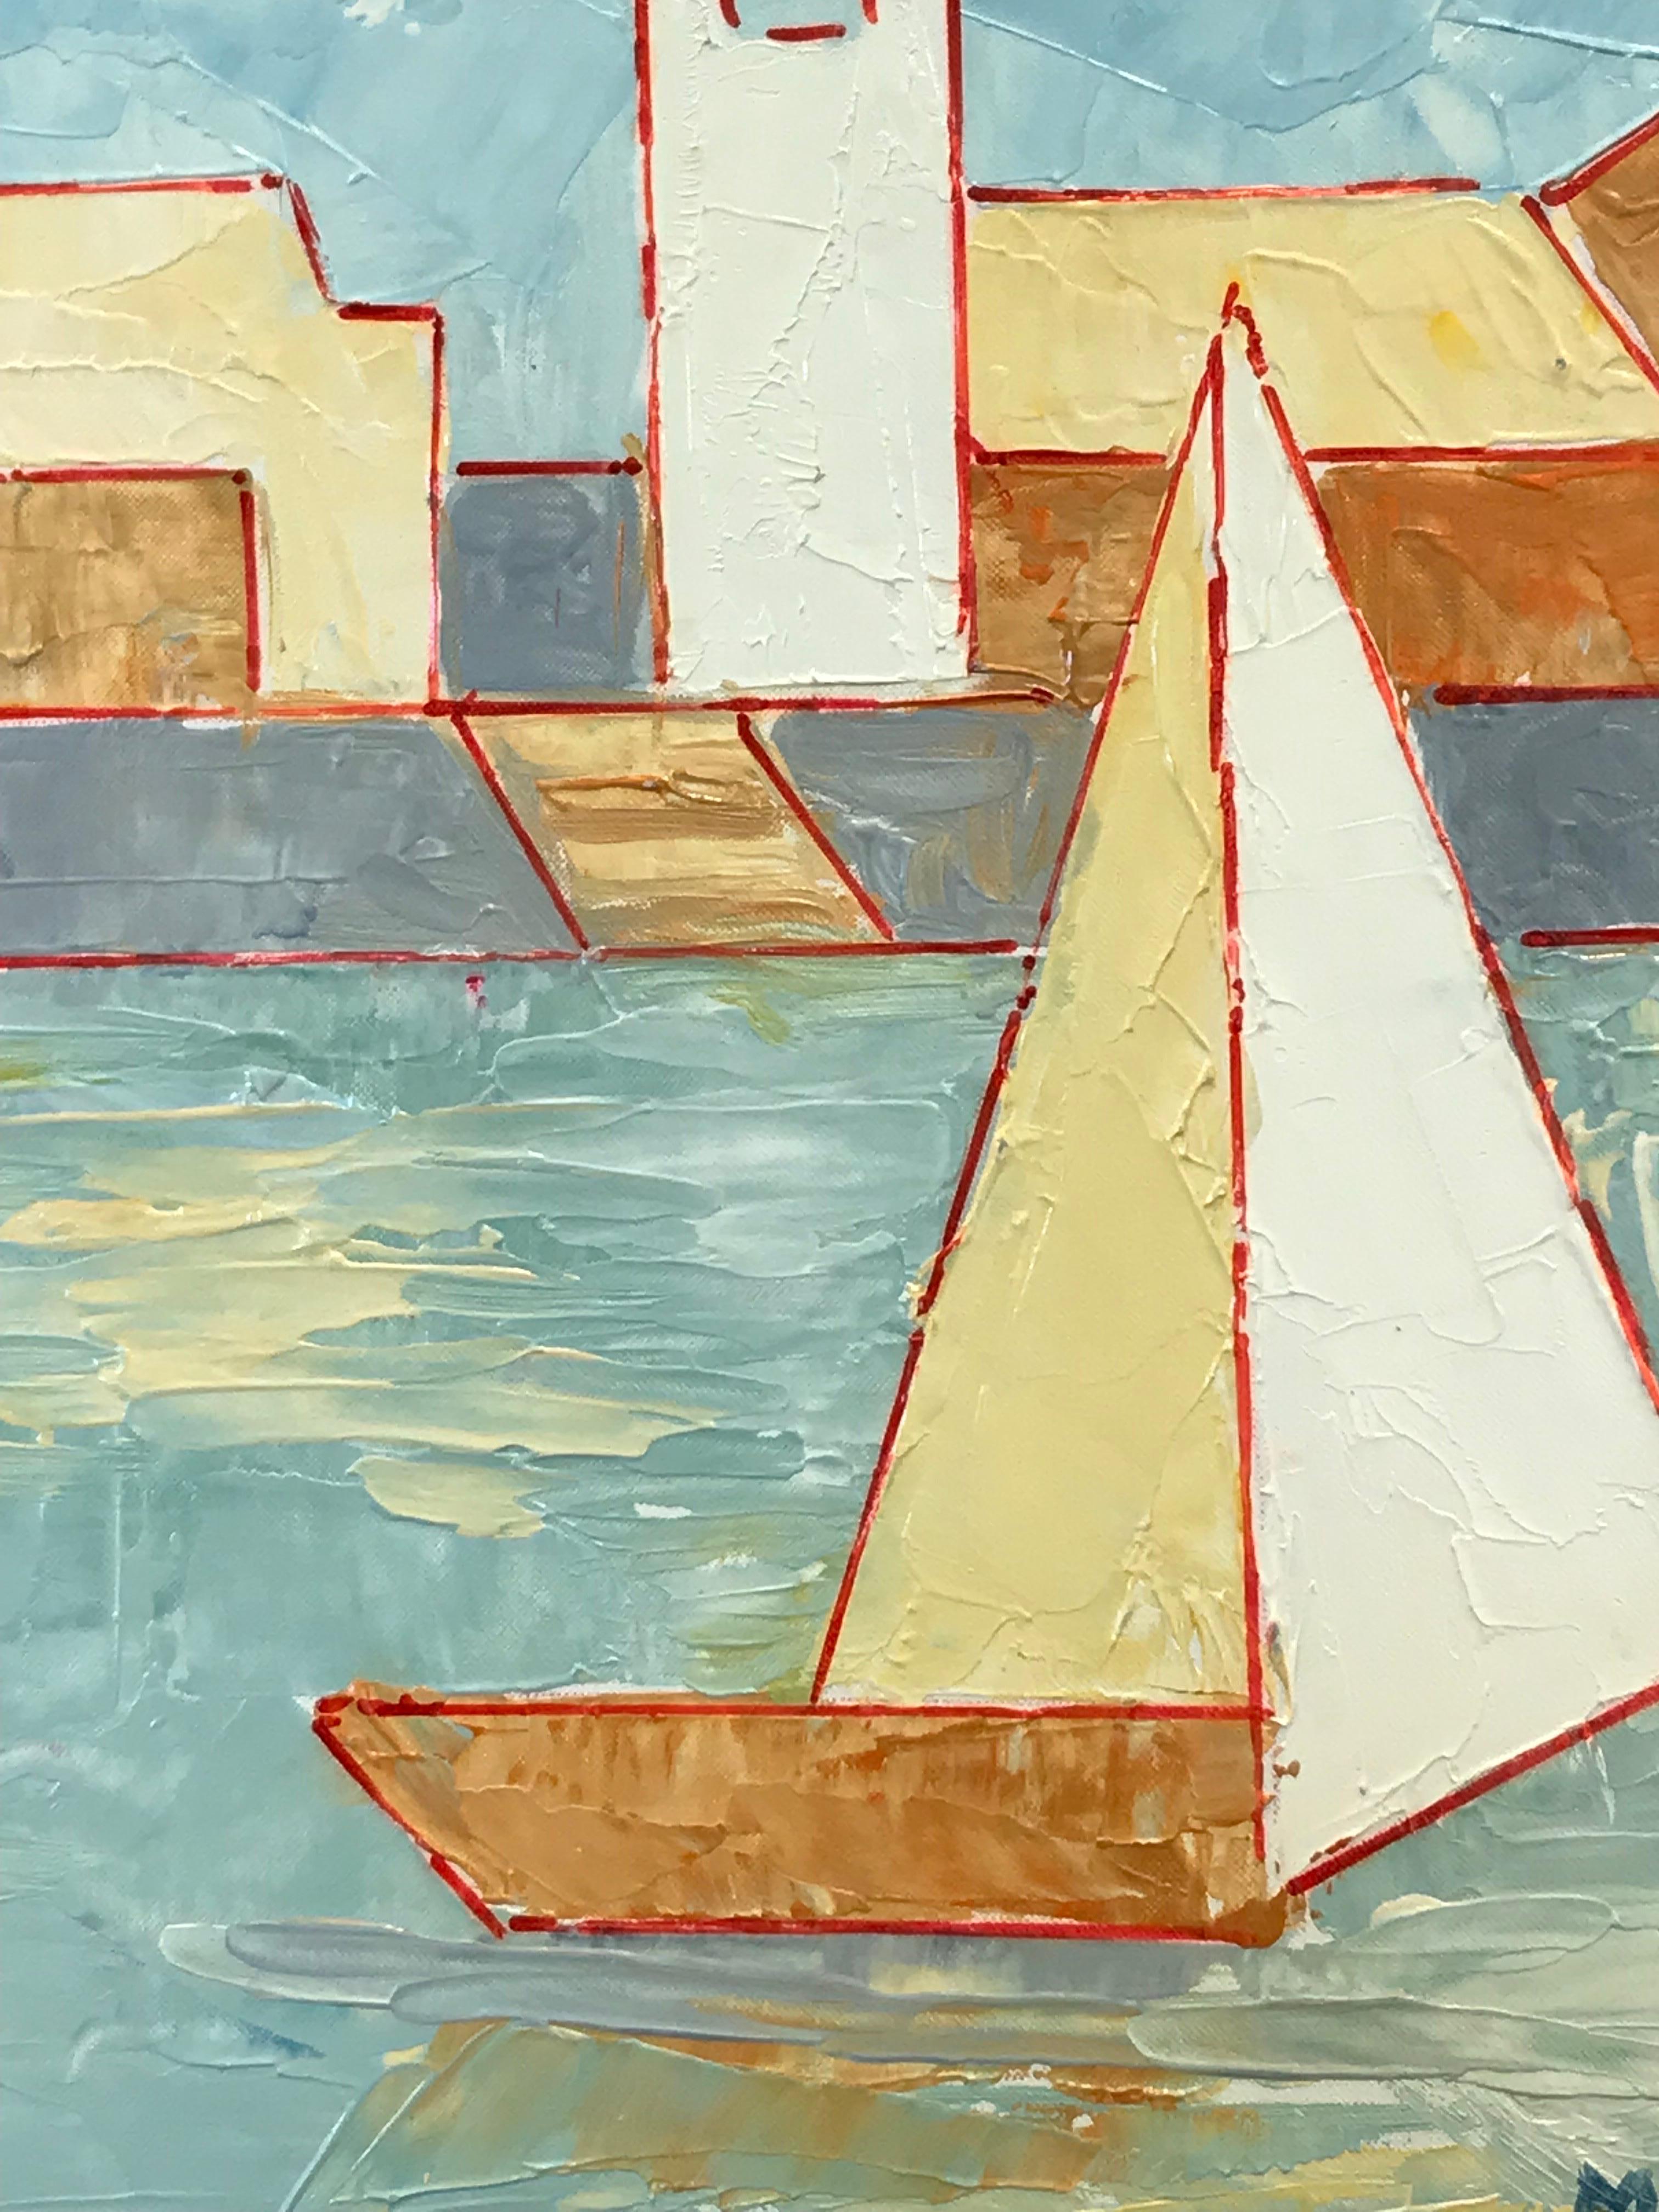 Soft Moody Colors Cubist Oil Painting Sailing Boat in Harbor - Gray Landscape Painting by Maggy Clarysse